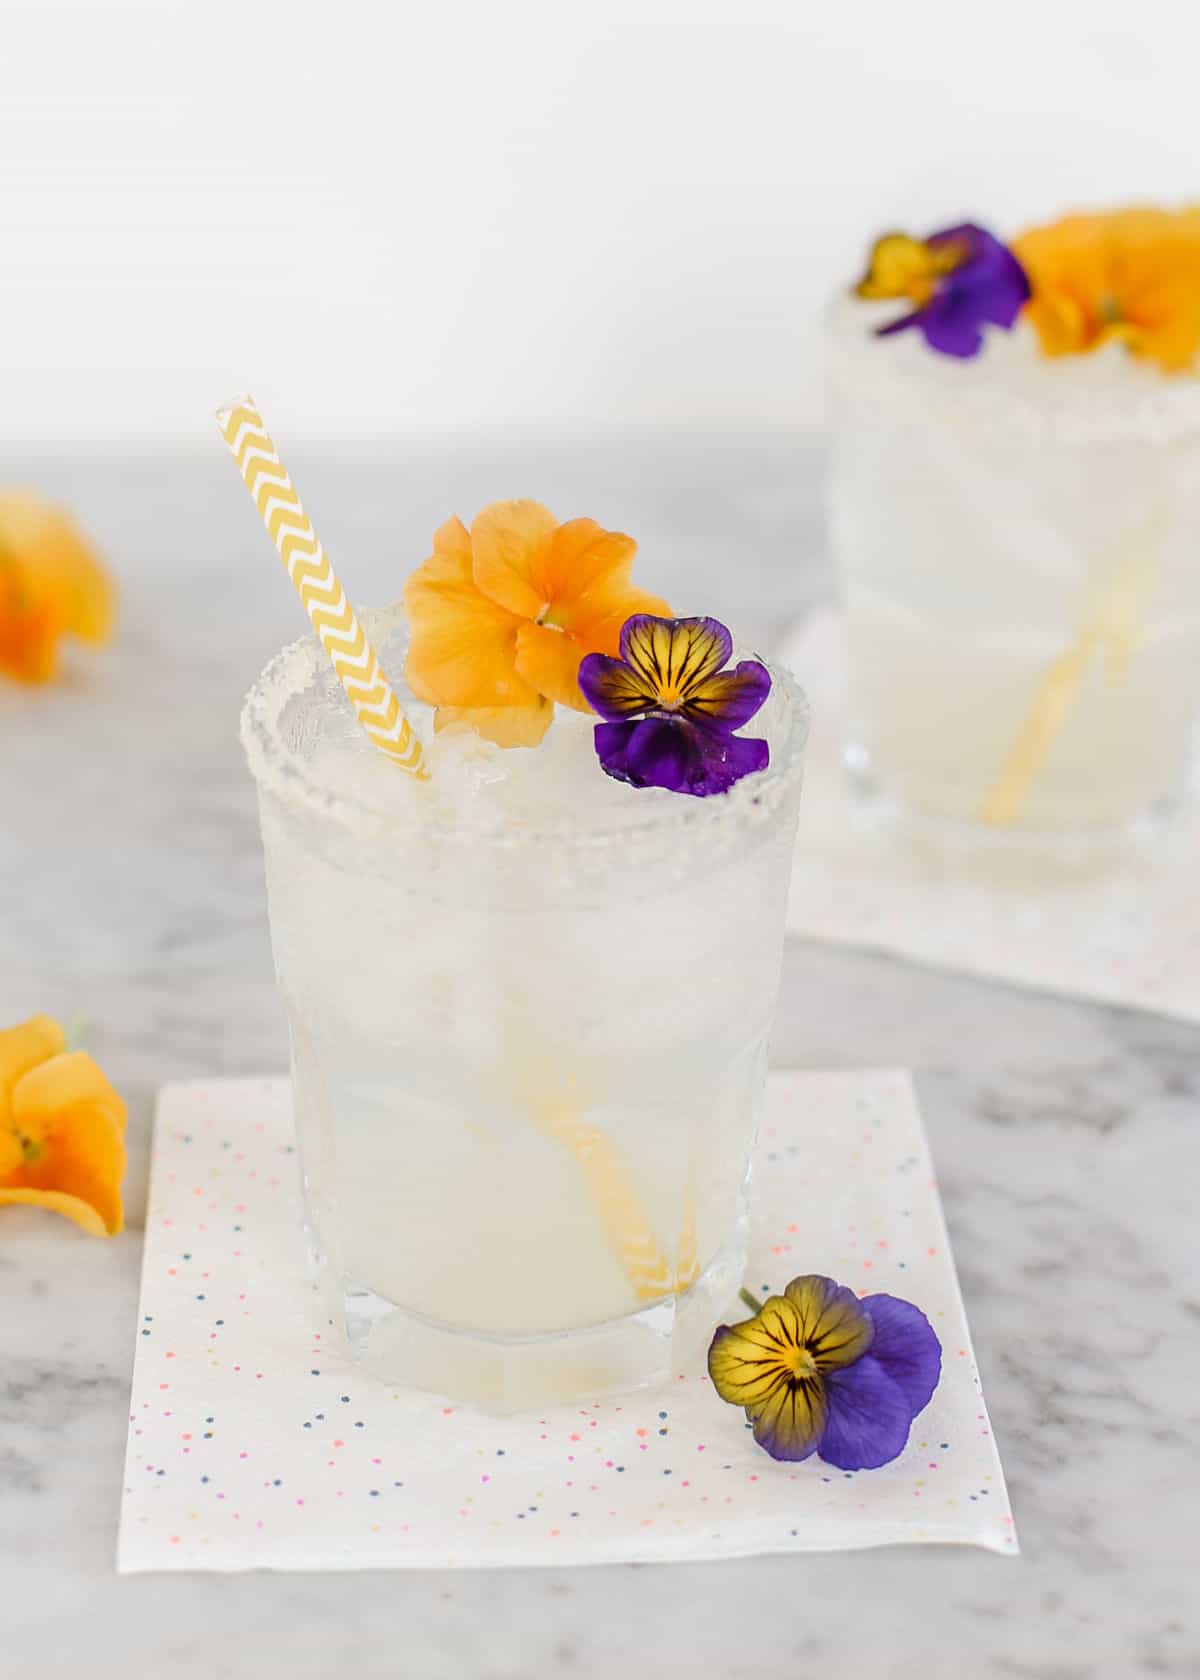 two margaritas in short glasses with salt rim and flower garnishes.